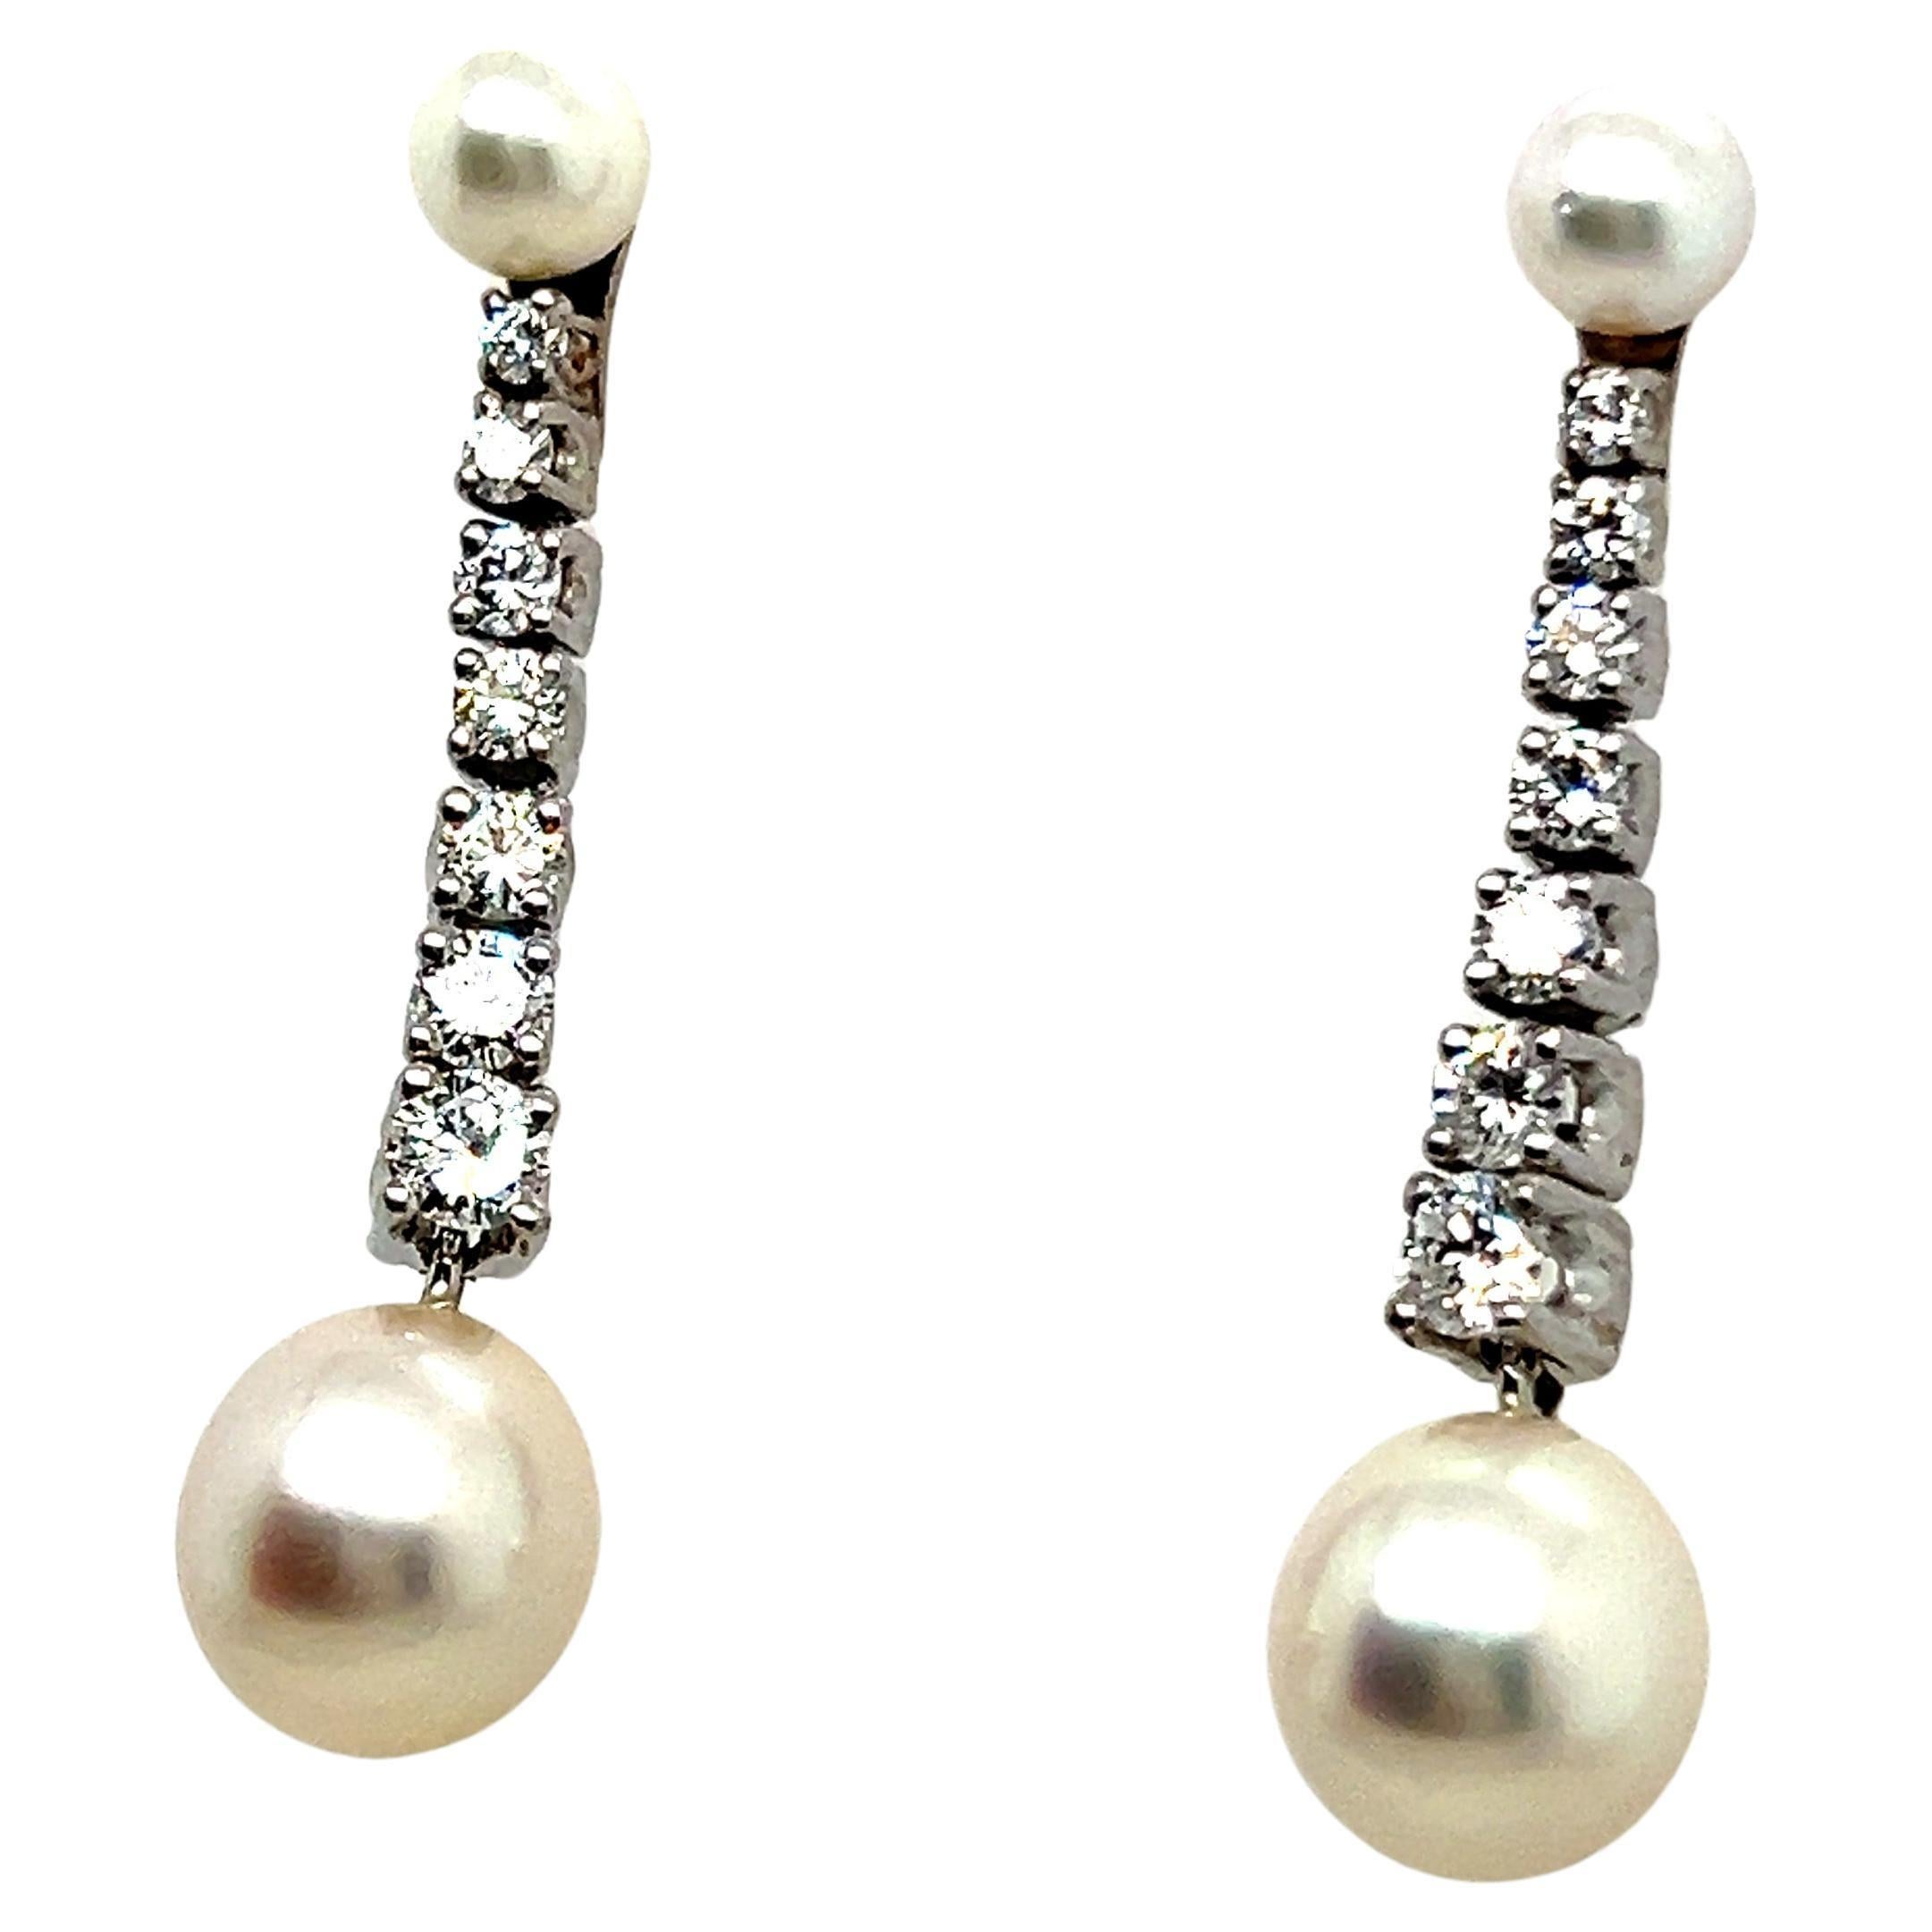 Discover the allure of our dangle earrings with pearls and diamonds, delicately fashioned in 18 Karat white gold. Adorned with 14 brilliant-cut diamonds totaling 1.05 carats, boasting G-H color and vs clarity, these charming bijoux radiate